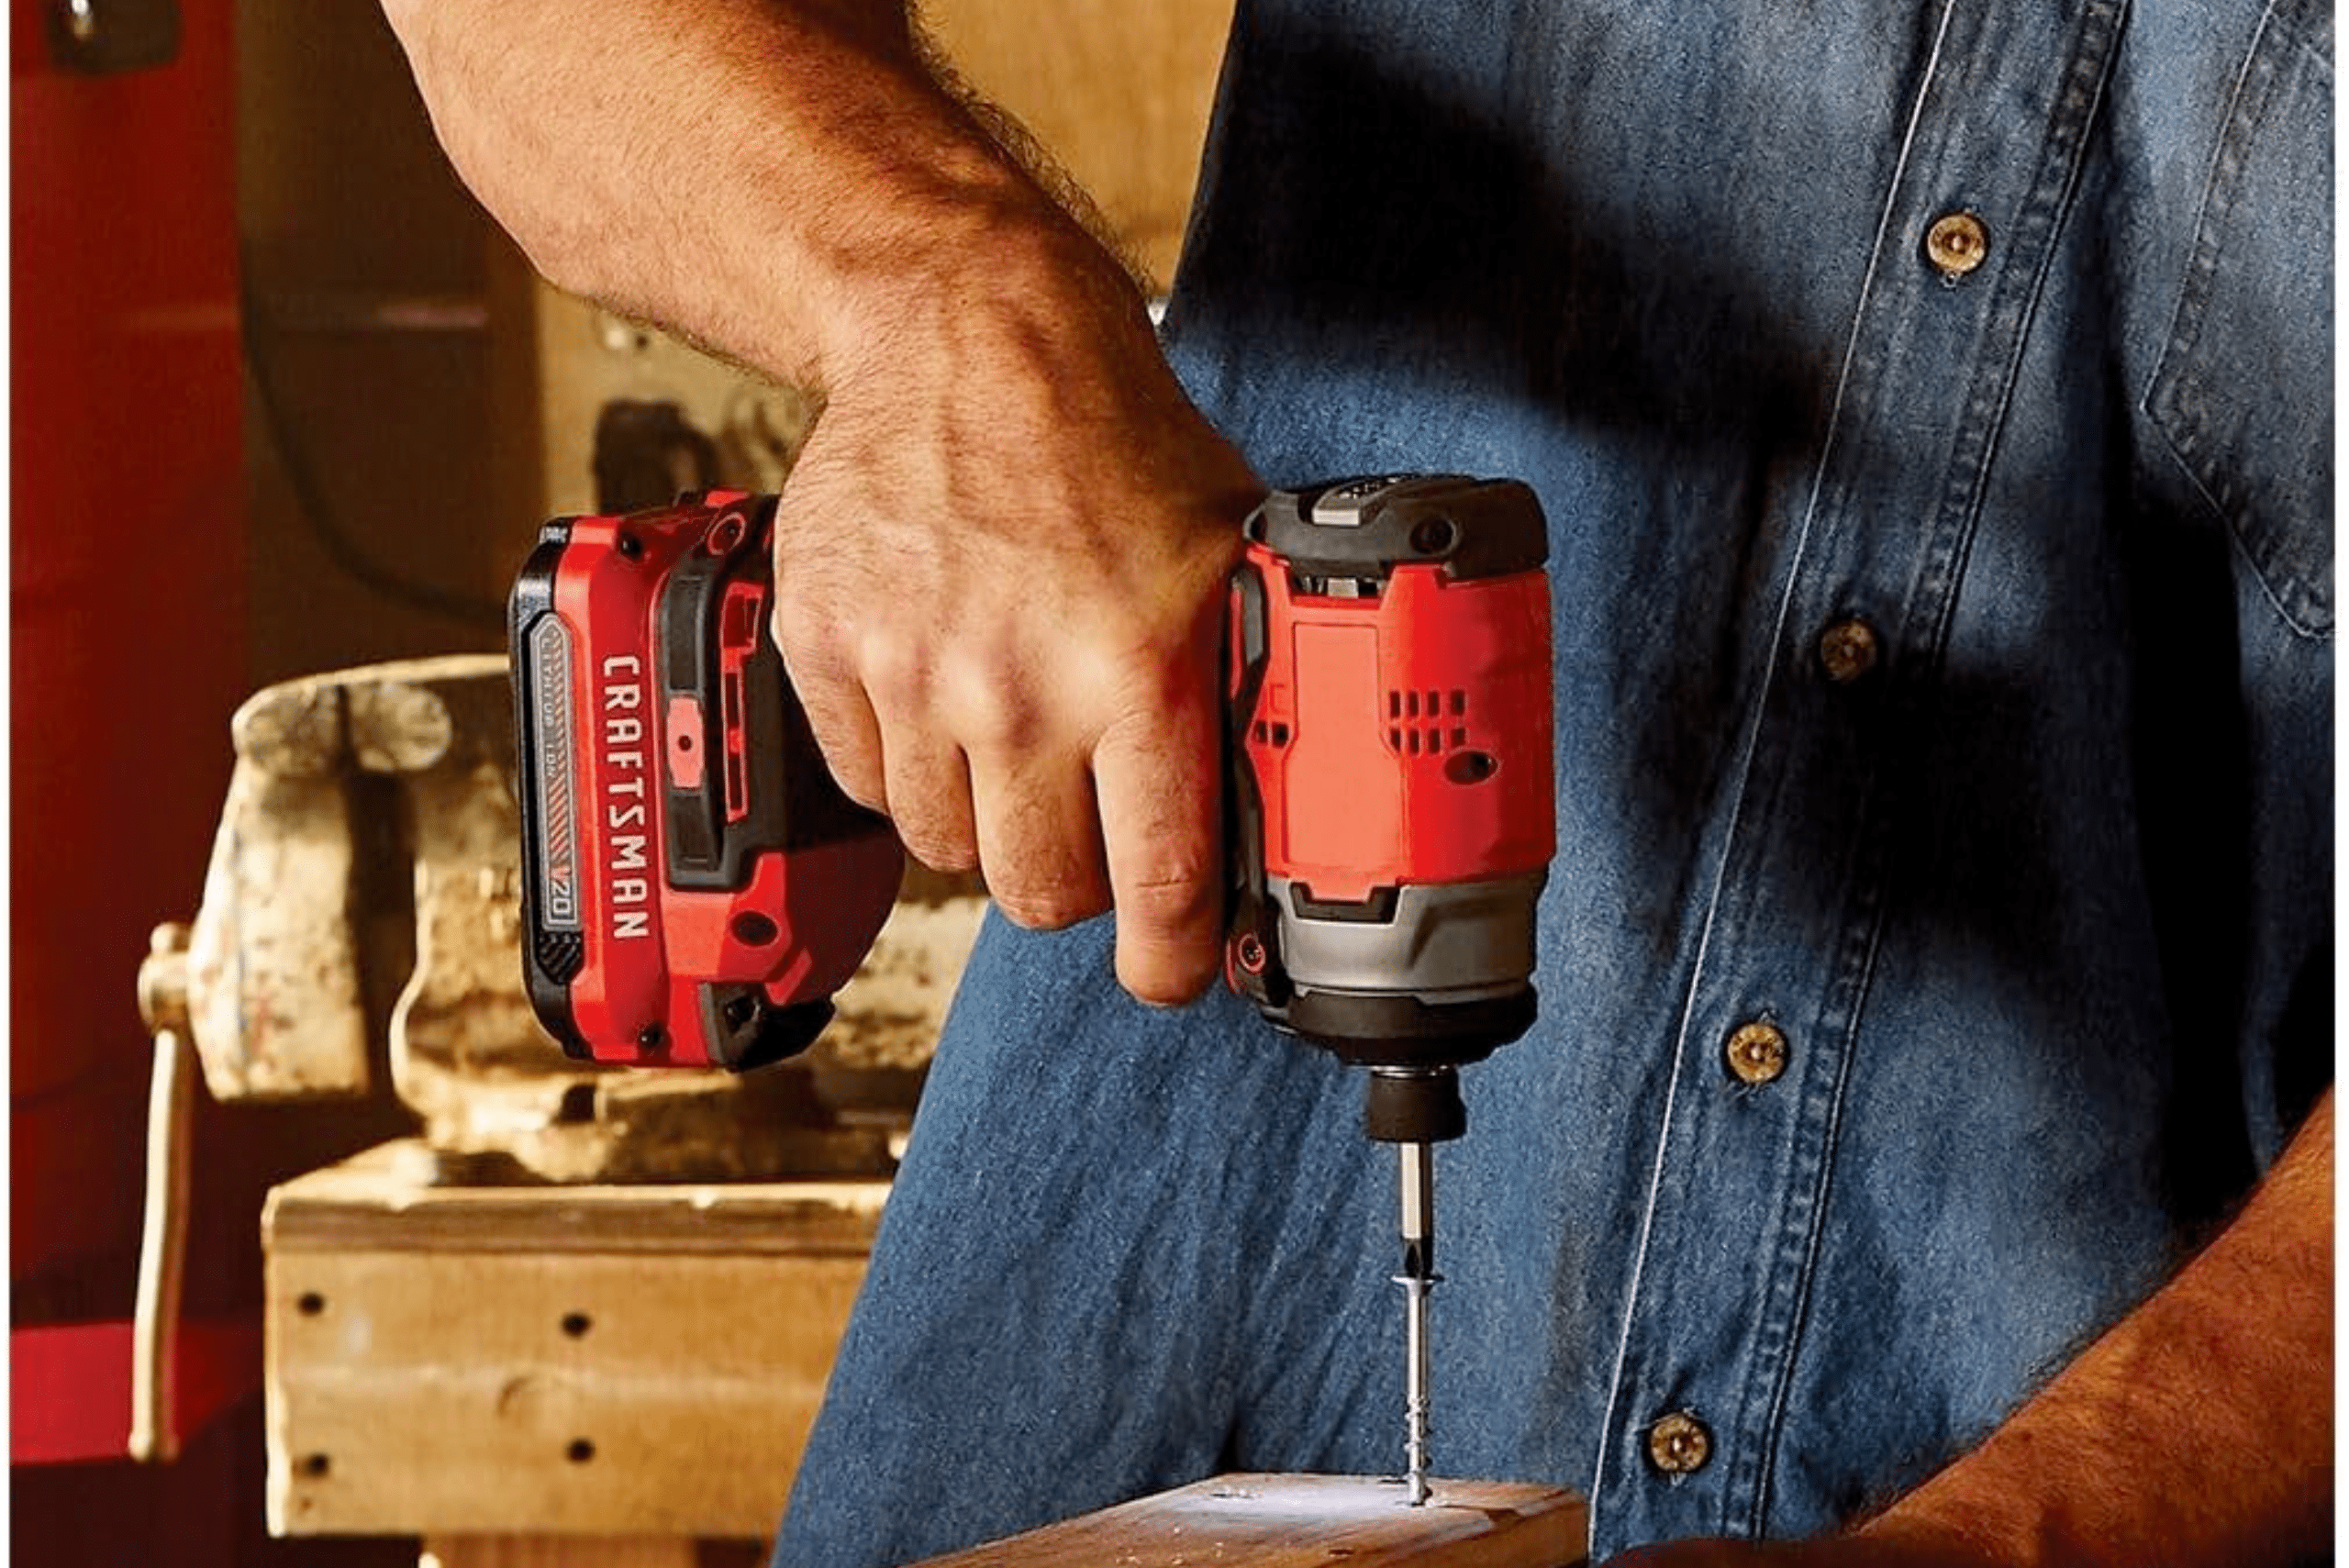 Person using impact driver from Craftsman.